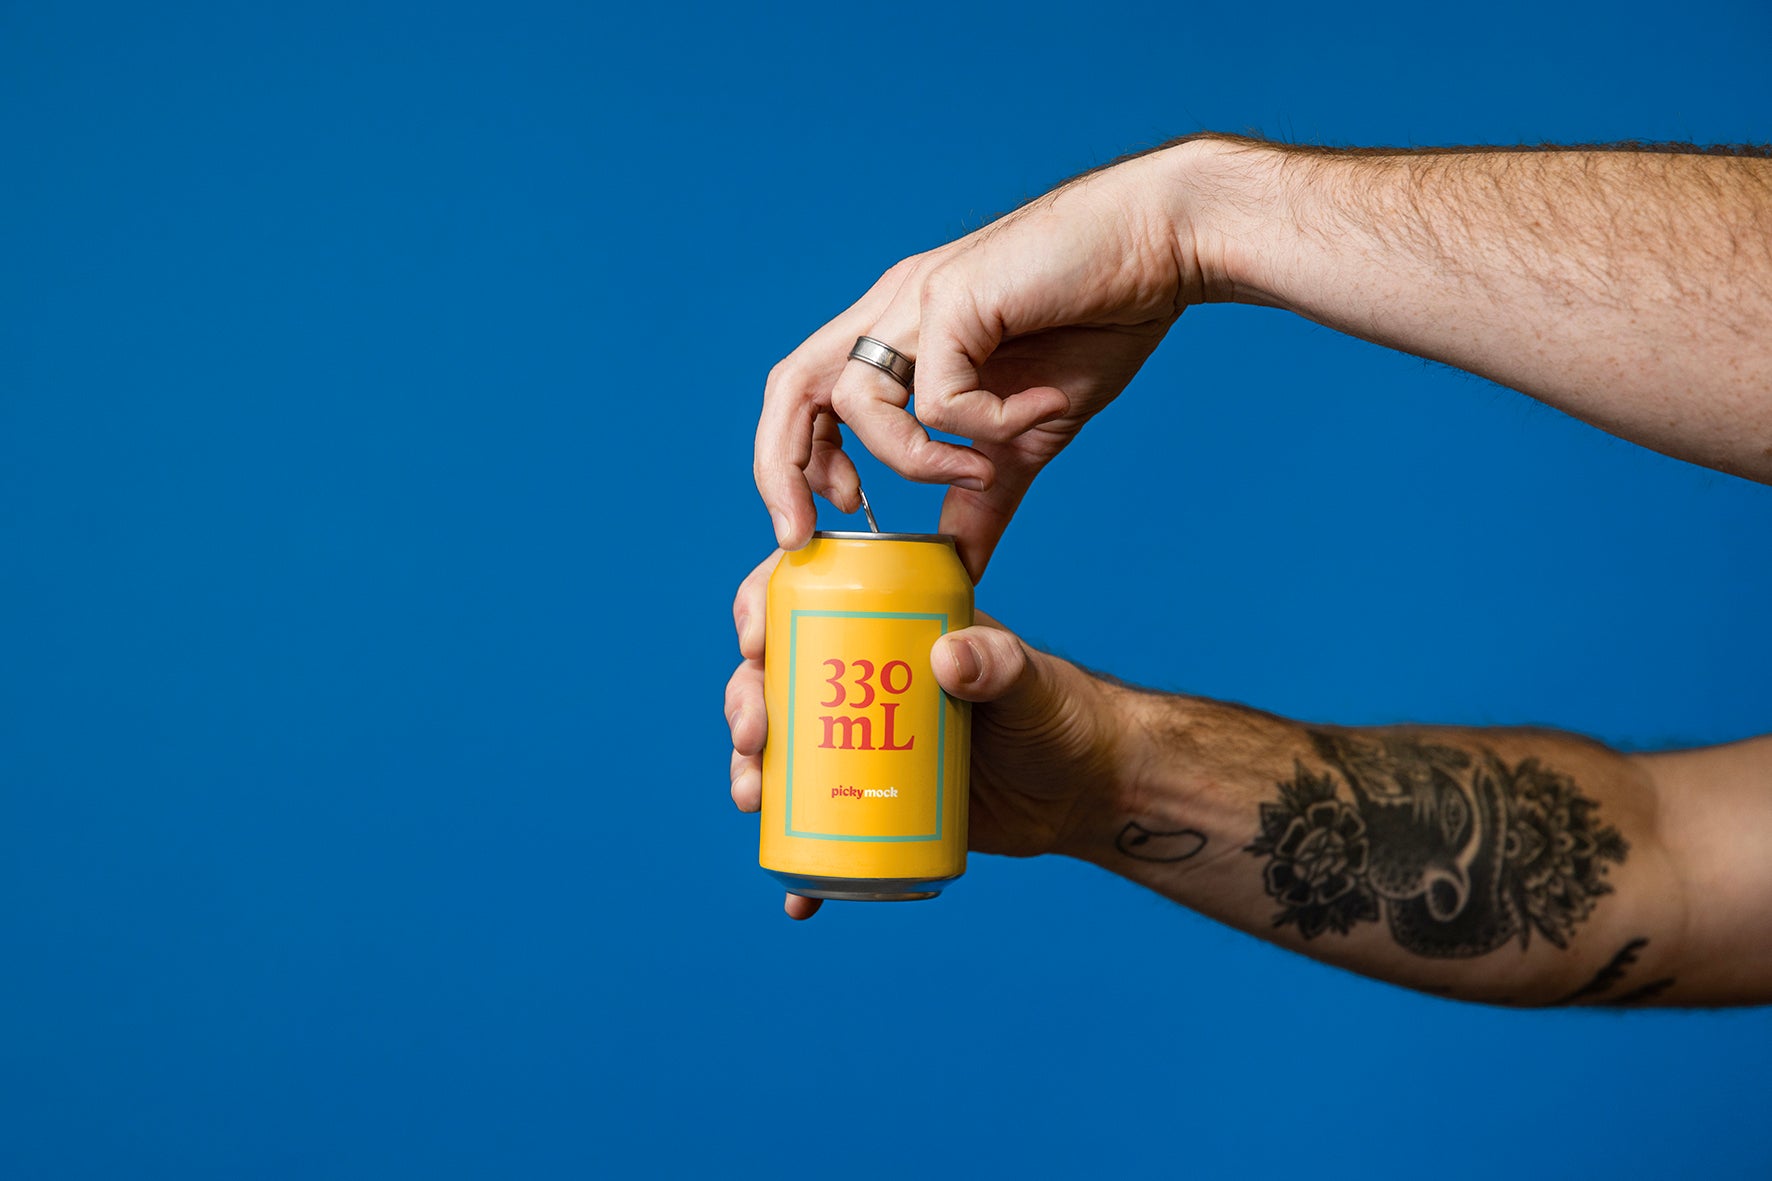 Bright drinks can is held up and opened by tattooed male arms, against a vibrant blue studio background. 